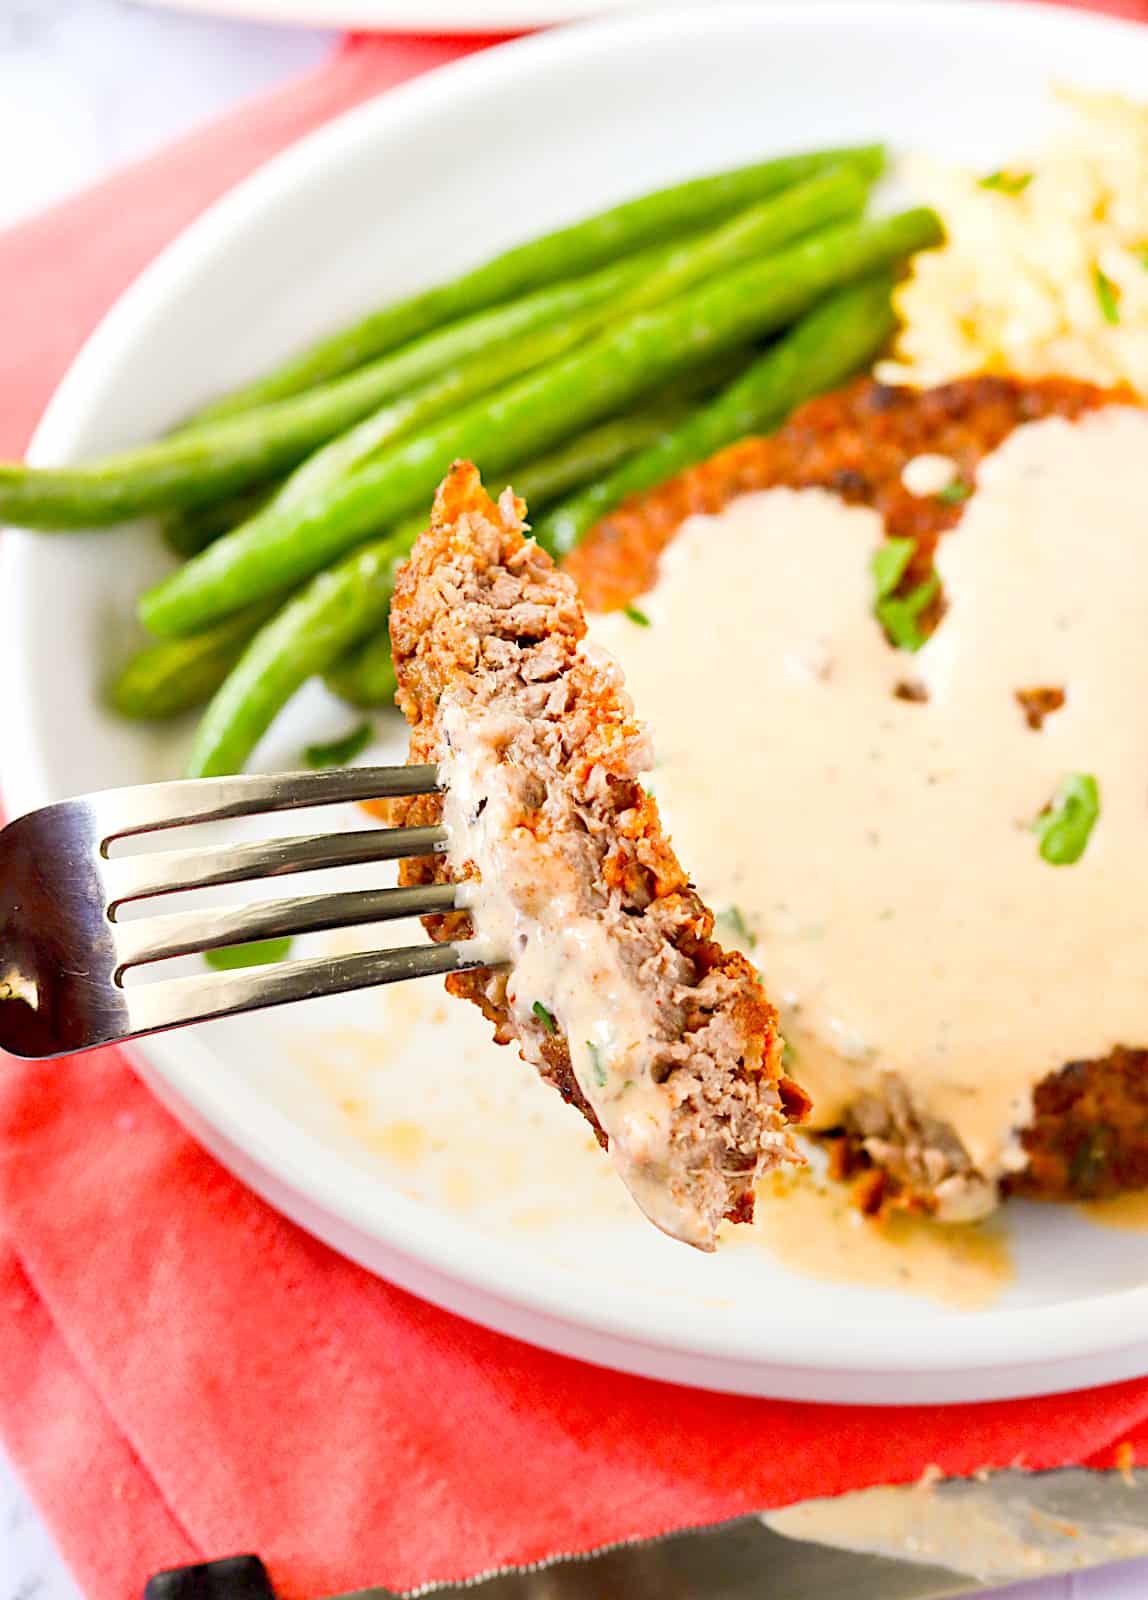 Enjoying chicken fried steak with roasted green beans 